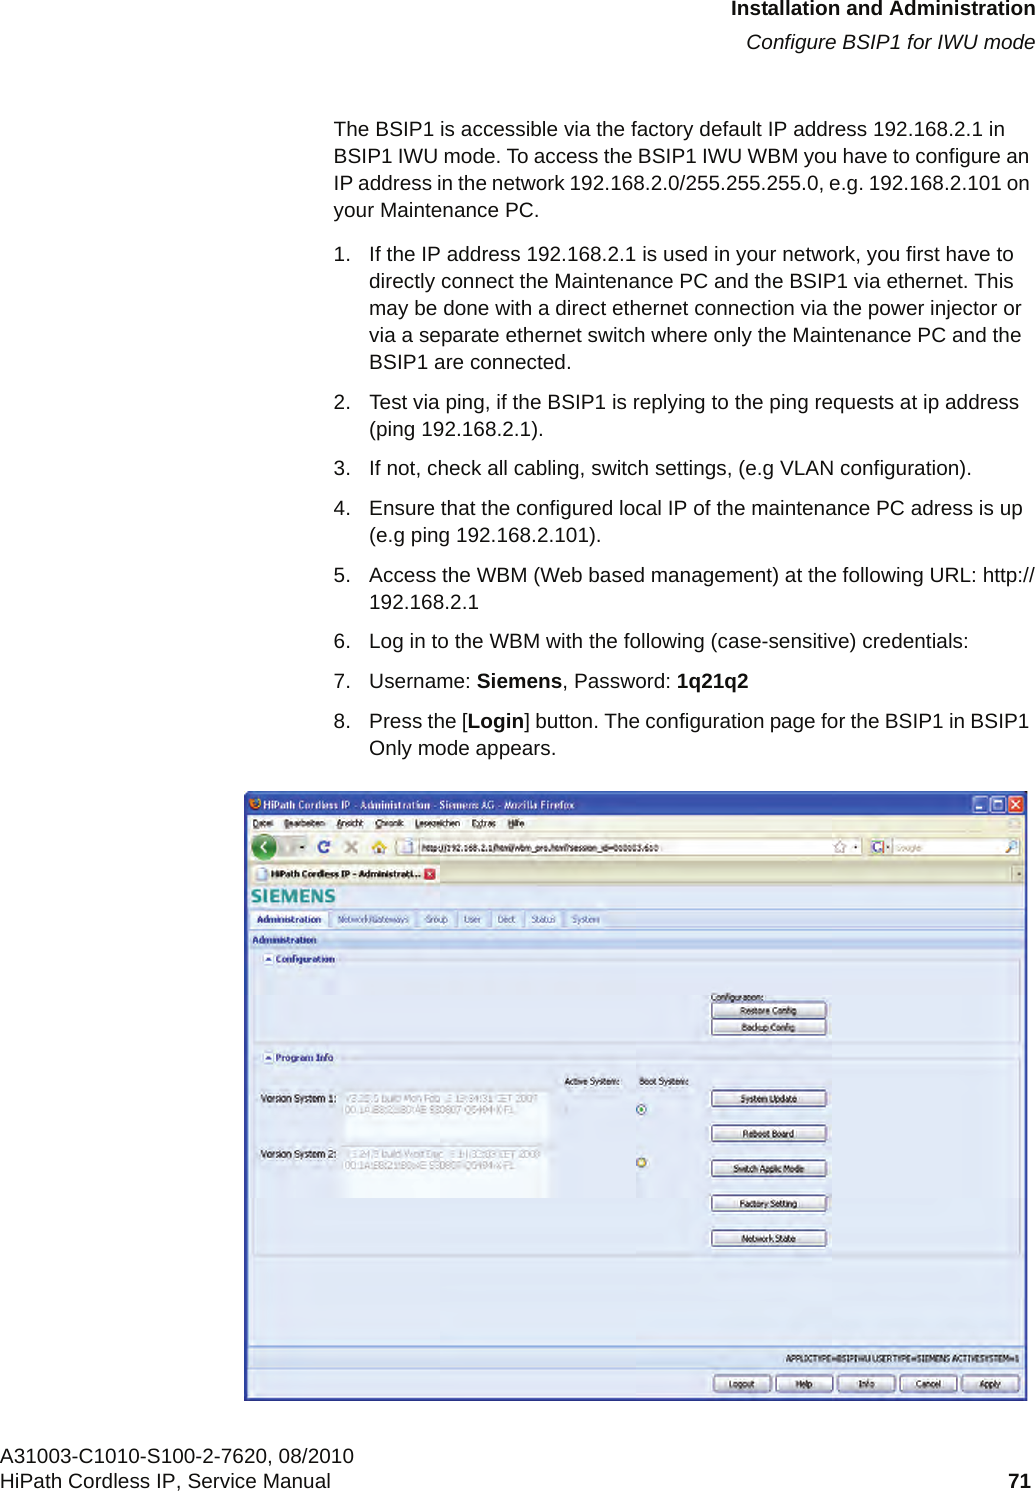 c05_ikon.fmInstallation and AdministrationConfigure BSIP1 for IWU modeA31003-C1010-S100-2-7620, 08/2010HiPath Cordless IP, Service Manual 71           The BSIP1 is accessible via the factory default IP address 192.168.2.1 in BSIP1 IWU mode. To access the BSIP1 IWU WBM you have to configure an IP address in the network 192.168.2.0/255.255.255.0, e.g. 192.168.2.101 on your Maintenance PC. 1. If the IP address 192.168.2.1 is used in your network, you first have to directly connect the Maintenance PC and the BSIP1 via ethernet. This may be done with a direct ethernet connection via the power injector or via a separate ethernet switch where only the Maintenance PC and the BSIP1 are connected.2. Test via ping, if the BSIP1 is replying to the ping requests at ip address (ping 192.168.2.1). 3. If not, check all cabling, switch settings, (e.g VLAN configuration). 4. Ensure that the configured local IP of the maintenance PC adress is up (e.g ping 192.168.2.101). 5. Access the WBM (Web based management) at the following URL: http://192.168.2.16. Log in to the WBM with the following (case-sensitive) credentials:7. Username: Siemens, Password: 1q21q28. Press the [Login] button. The configuration page for the BSIP1 in BSIP1 Only mode appears.